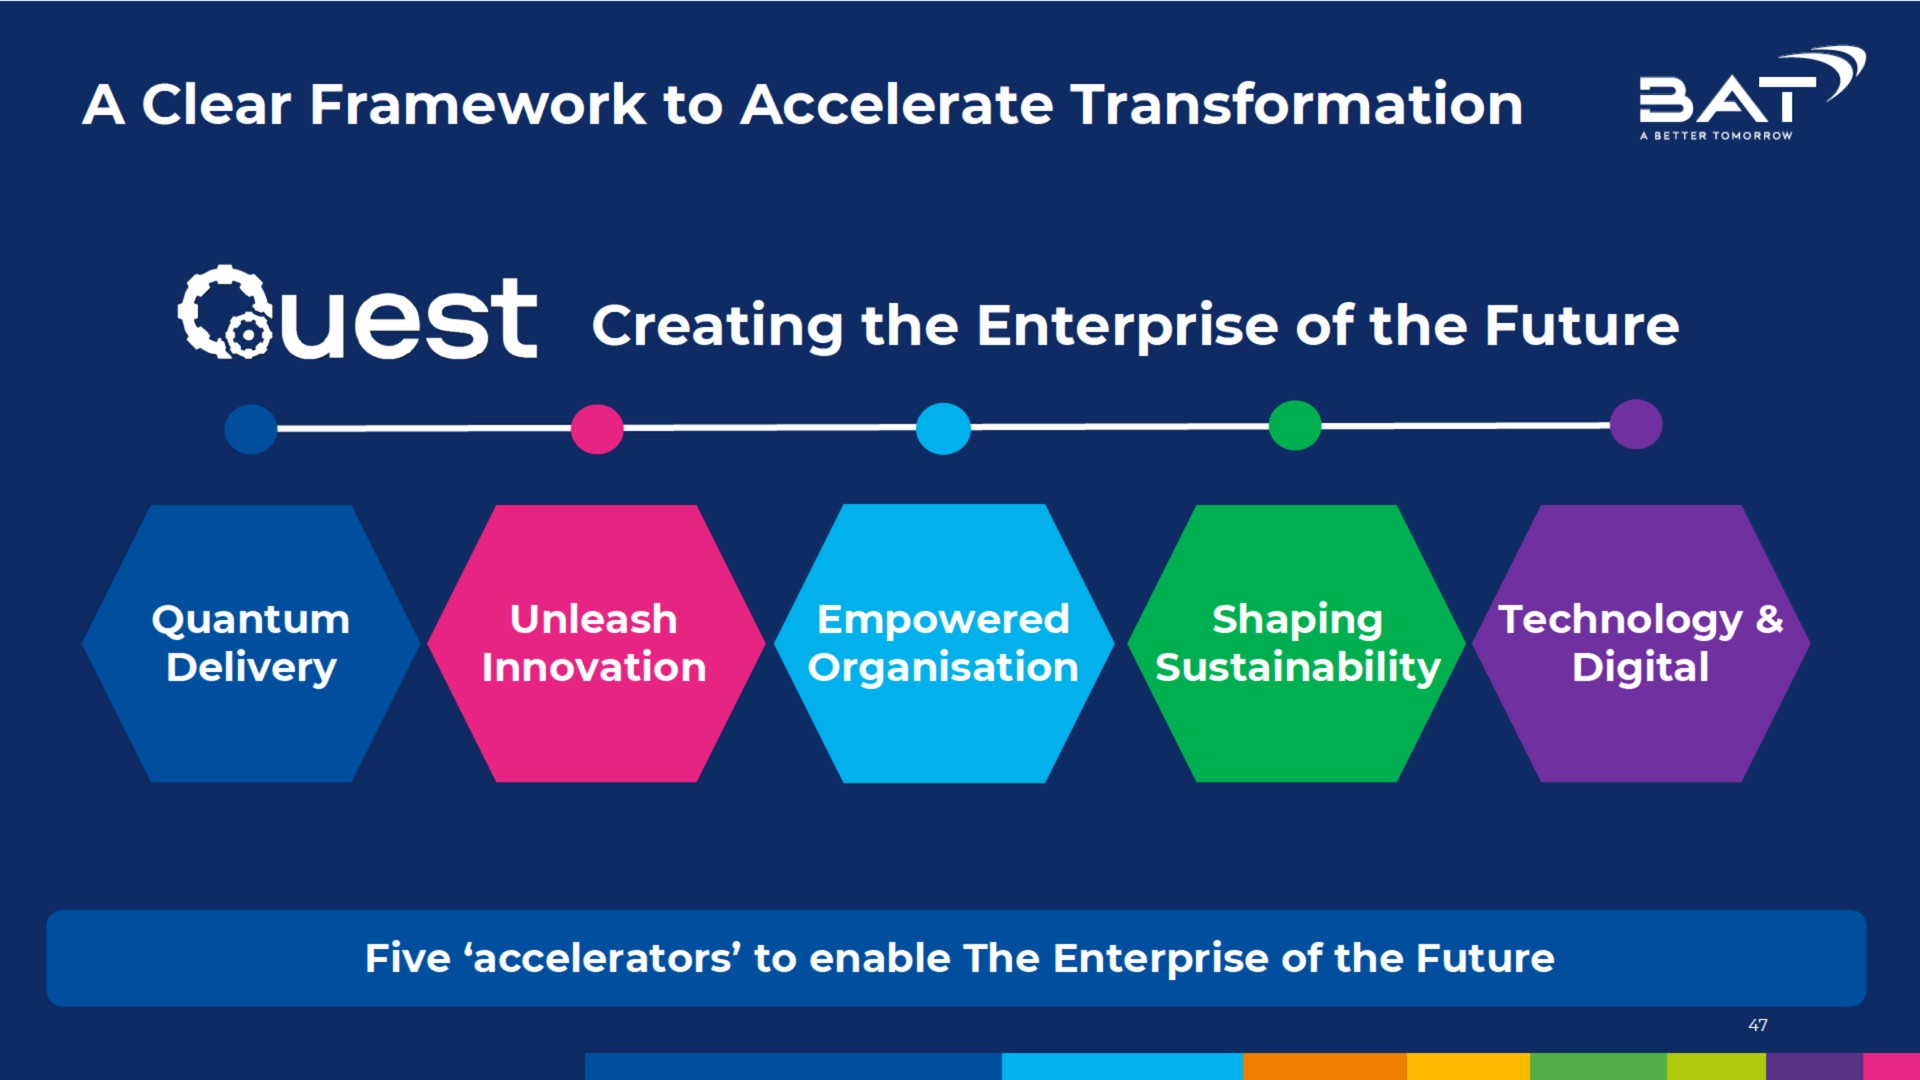 a clear framework to accelerate transformation creating the enterprise of the future | BAT